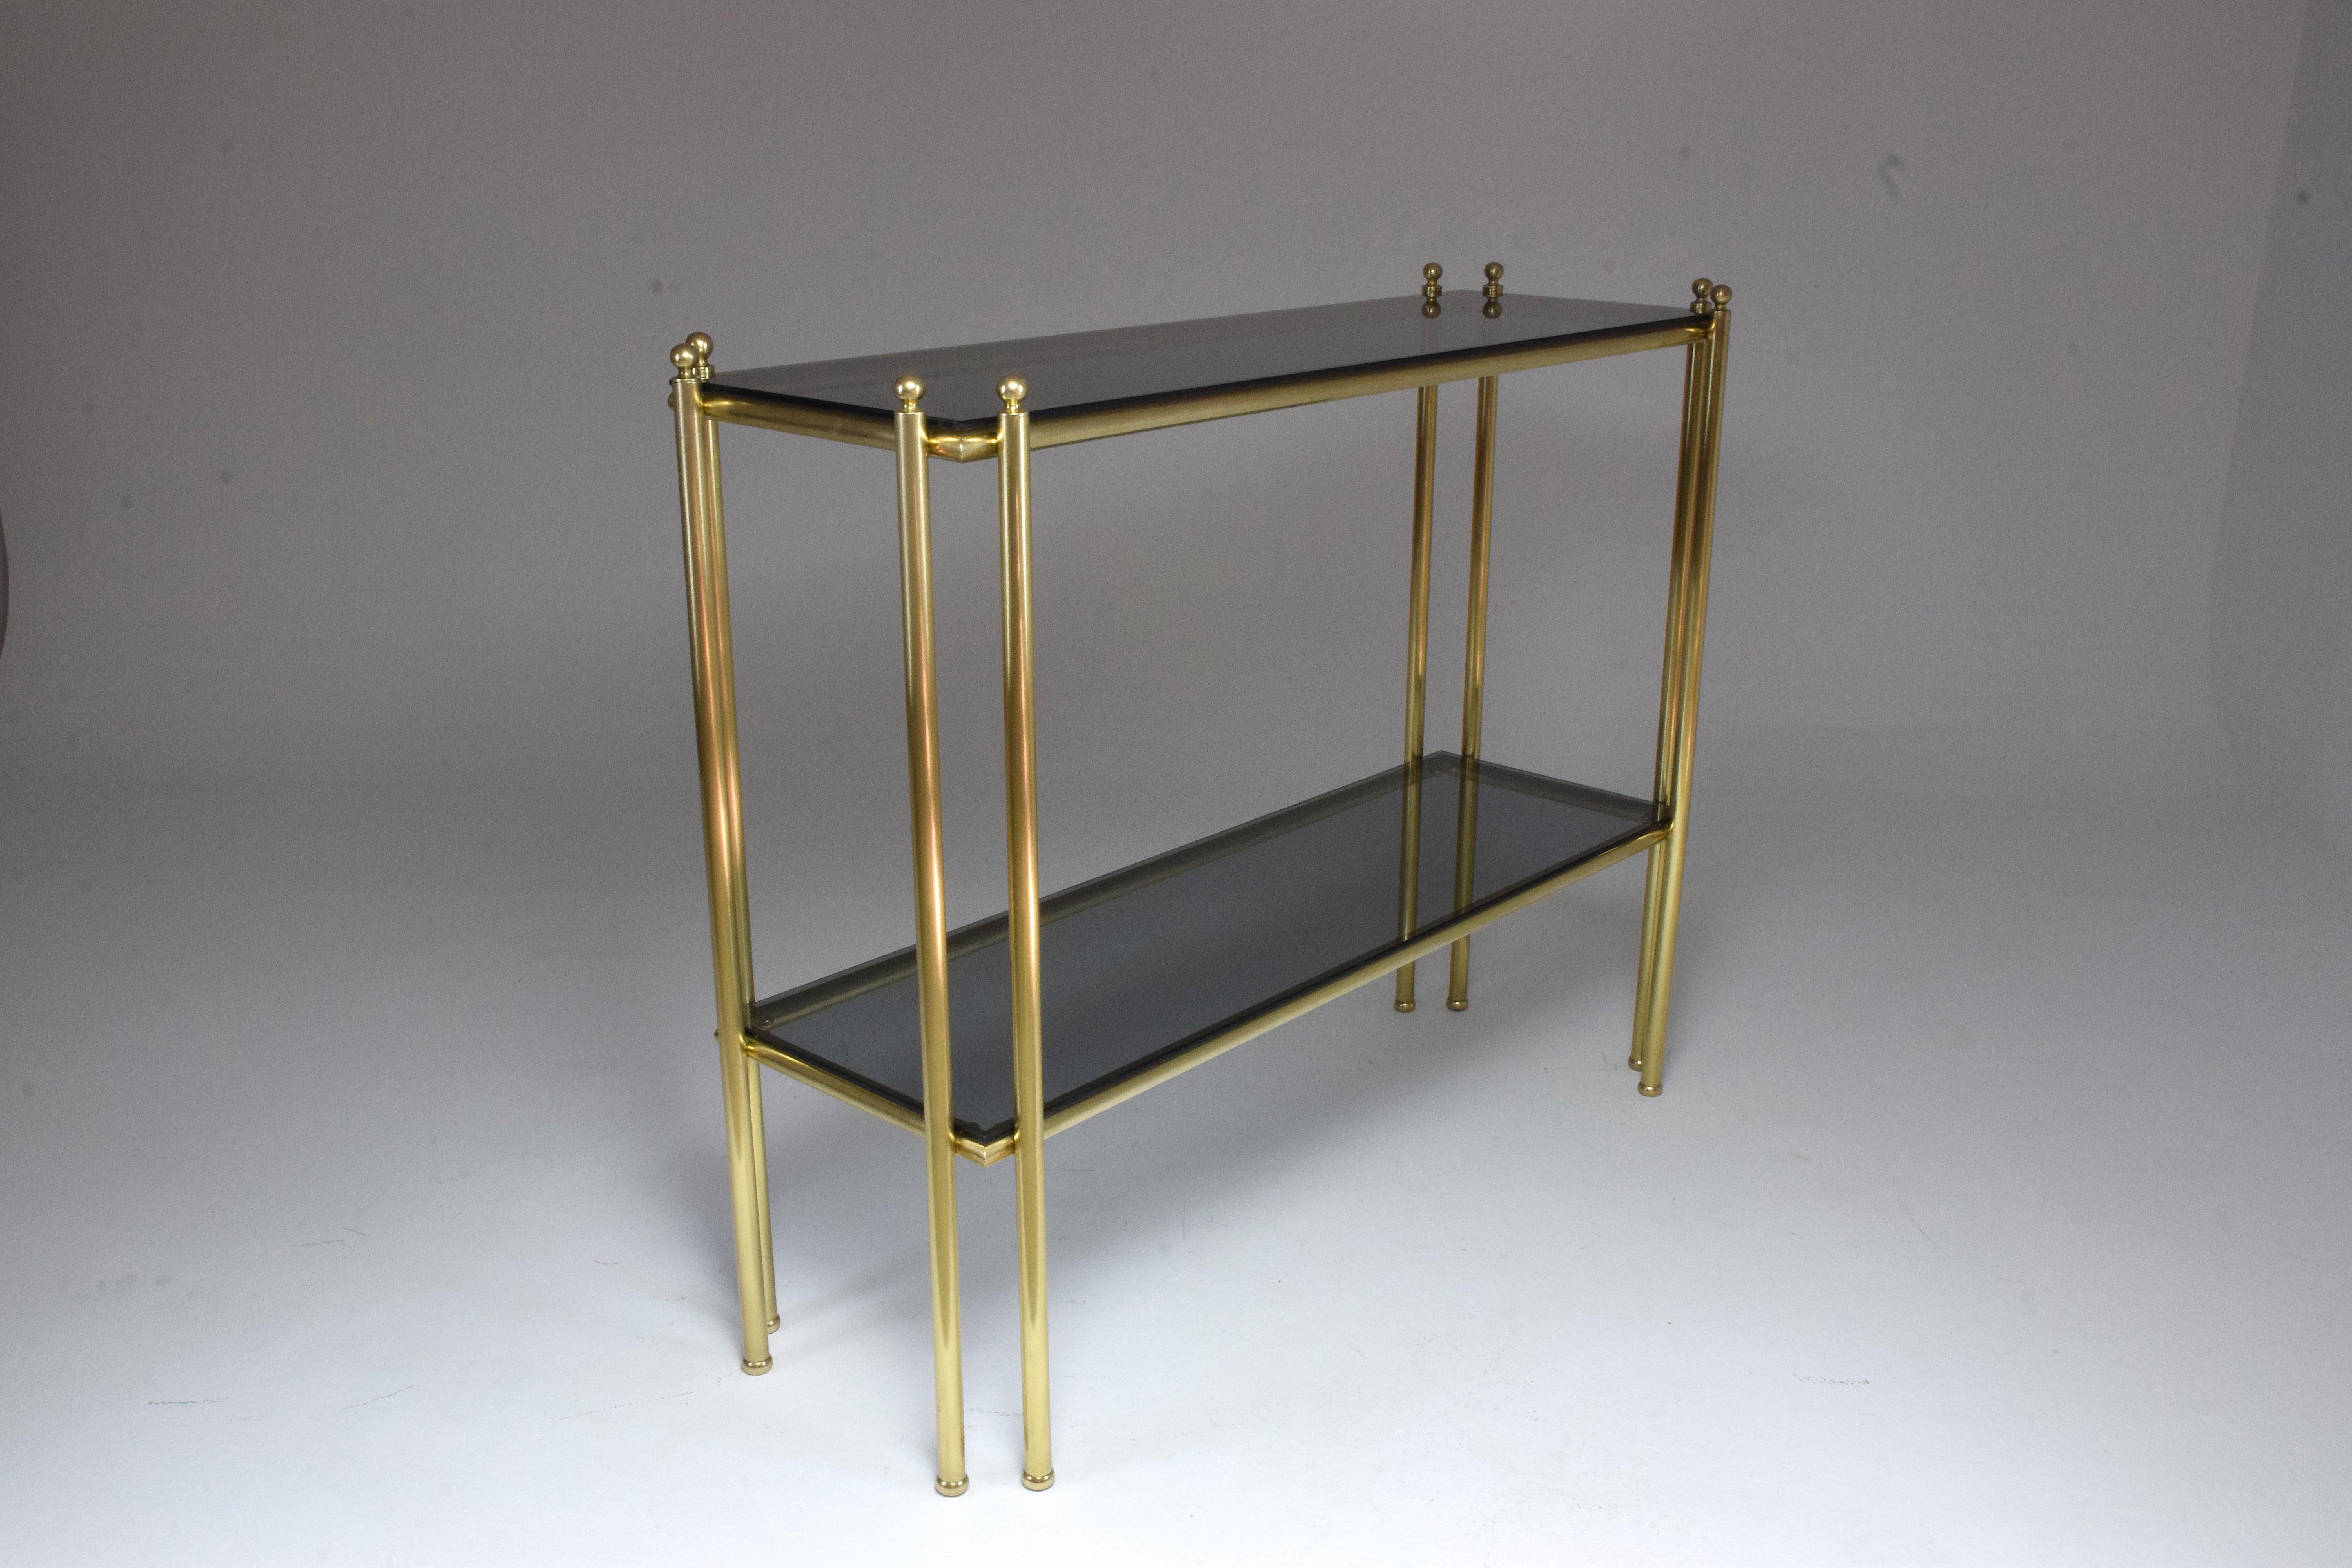 An elegant French 20th century vintage console table designed in France, in the 1970s composed of a solid gold polished brass tubular structure in Art Deco style.
The smoked glass has been replaced on the two-tiered console and the brass